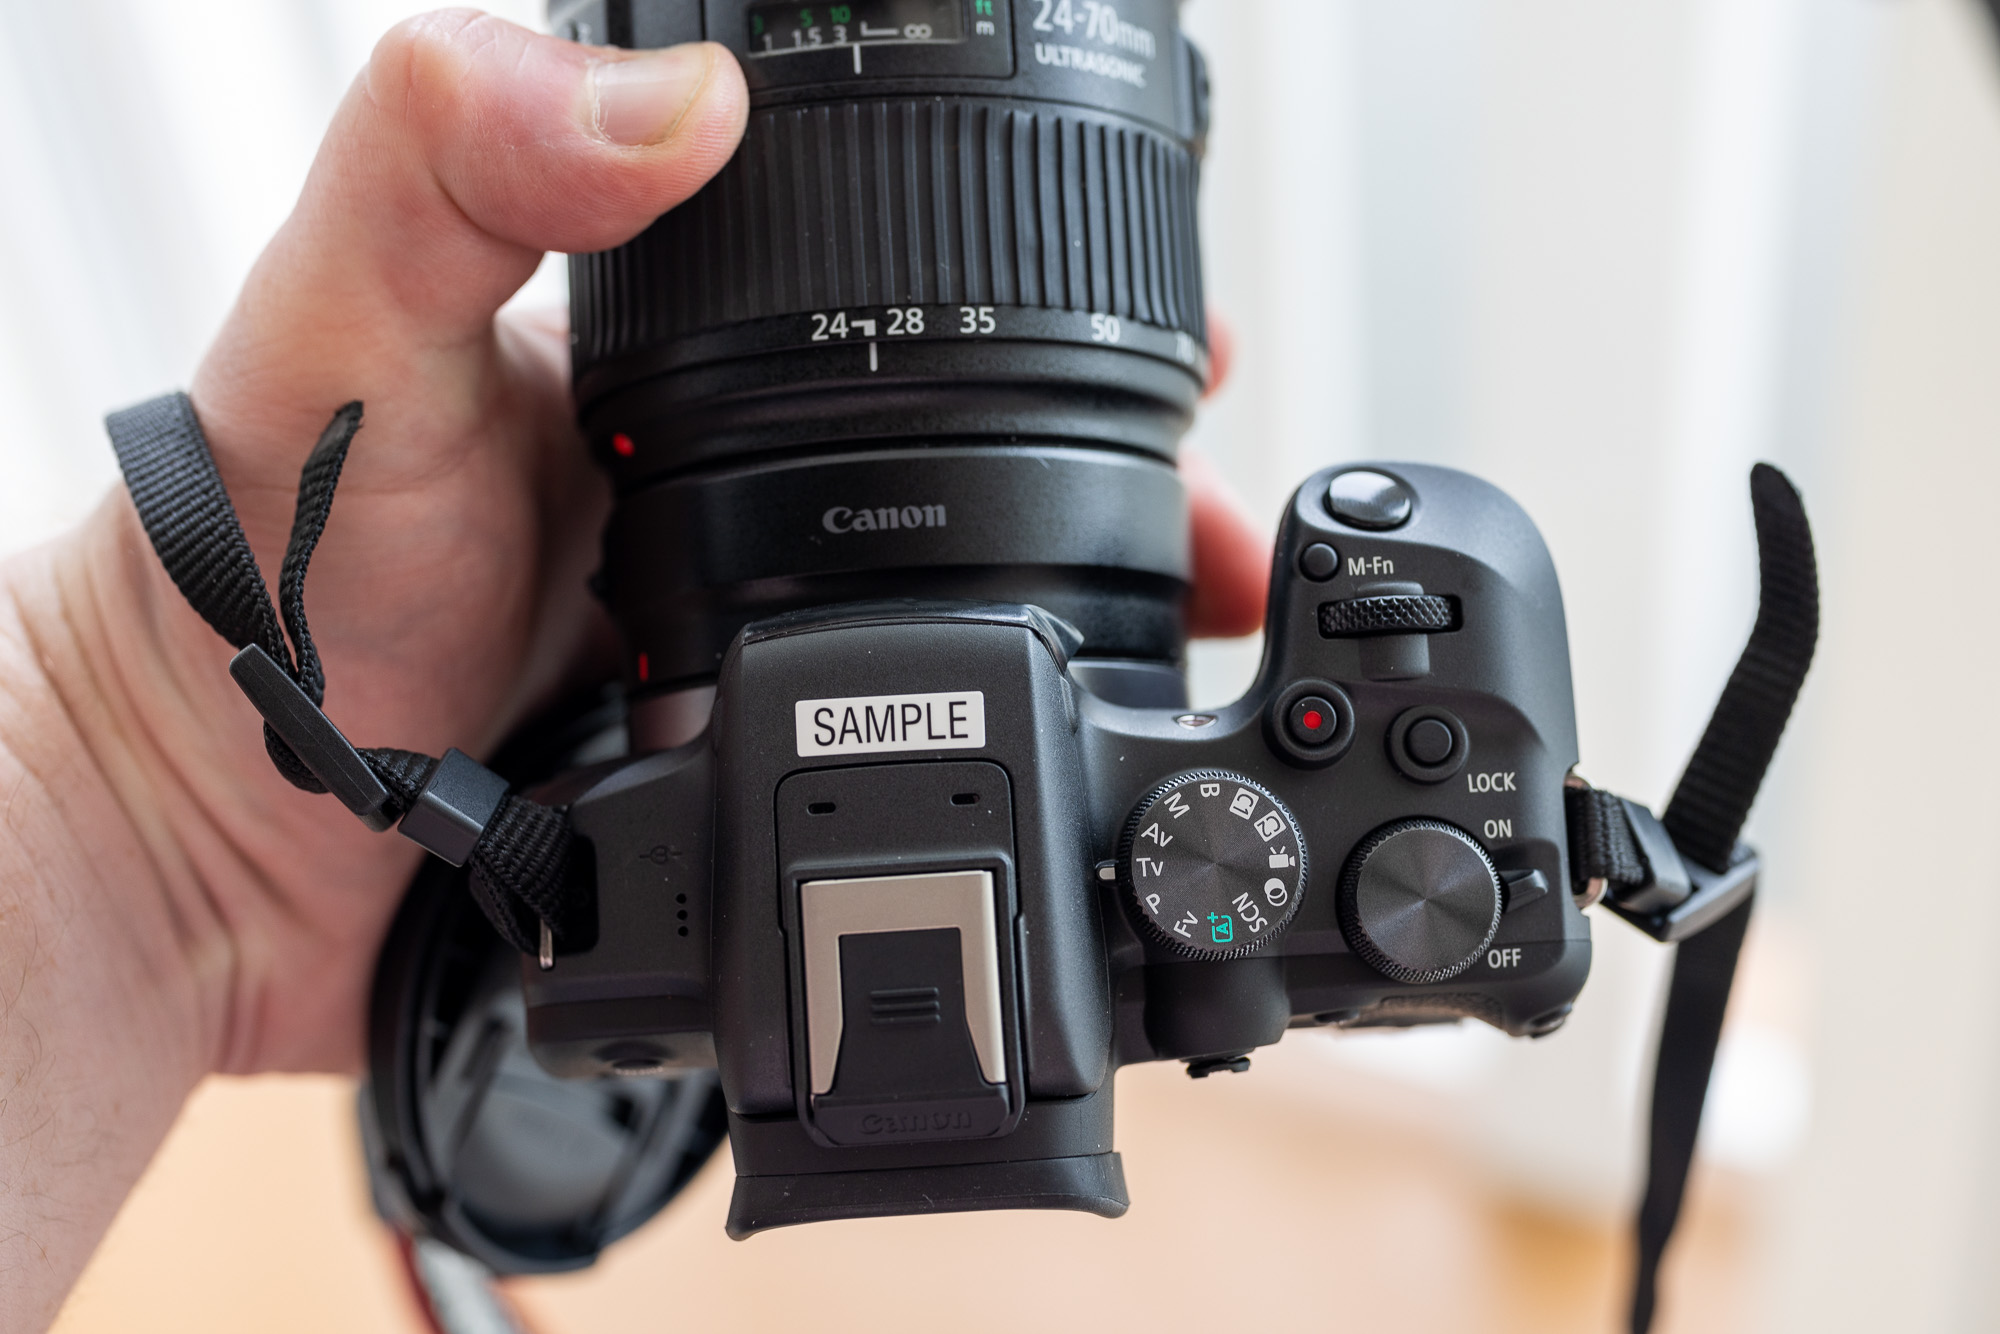 Canon Goes Super 35 Mirrorless—Introducing the Canon R7 and R10